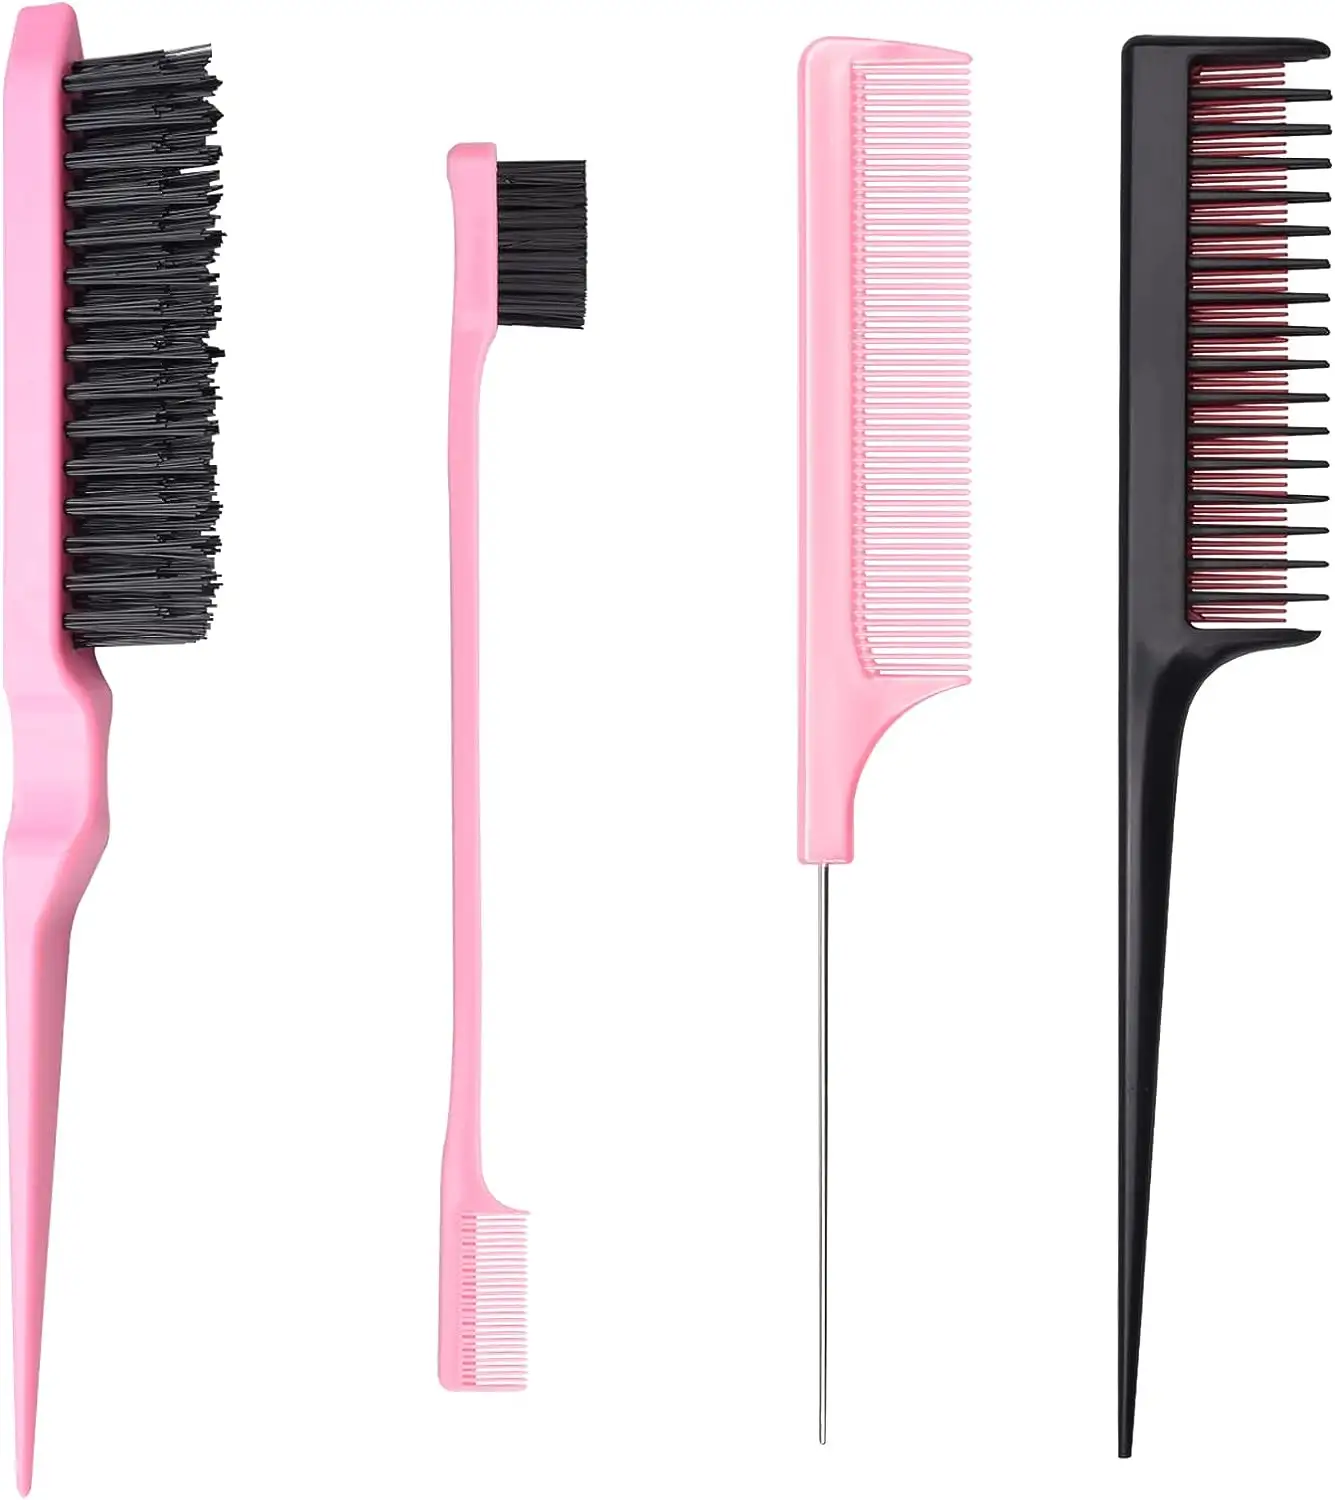 Hair Styling Comb Kit, Teasing Comb Brush Set Includes Fluffy Hair Brush, Double Sided Edge Control Brush